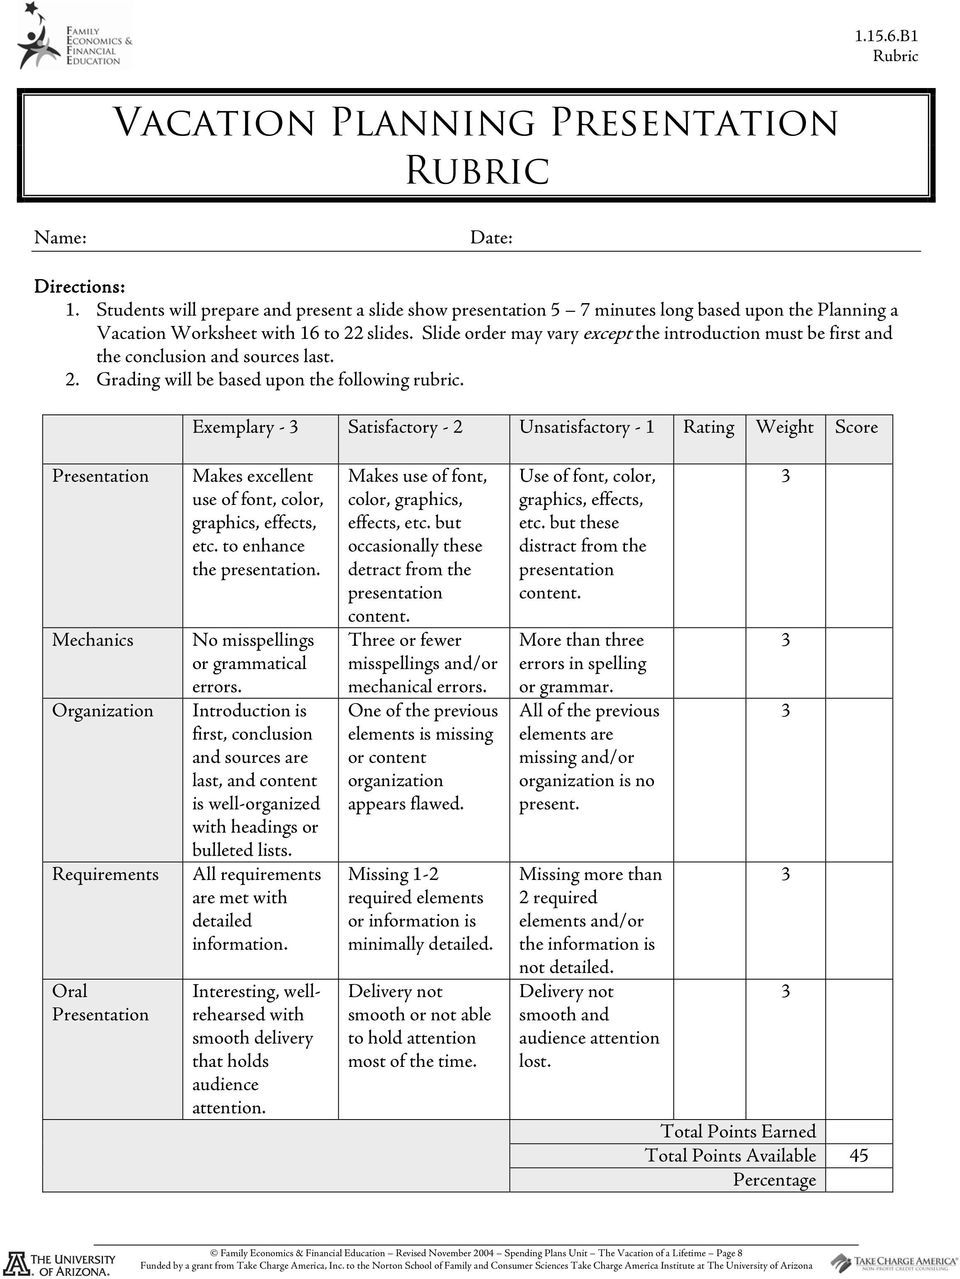 Slide order may vary except the introduction must be first and the conclusion and sources last. 2. Grading will be based upon the following rubric.